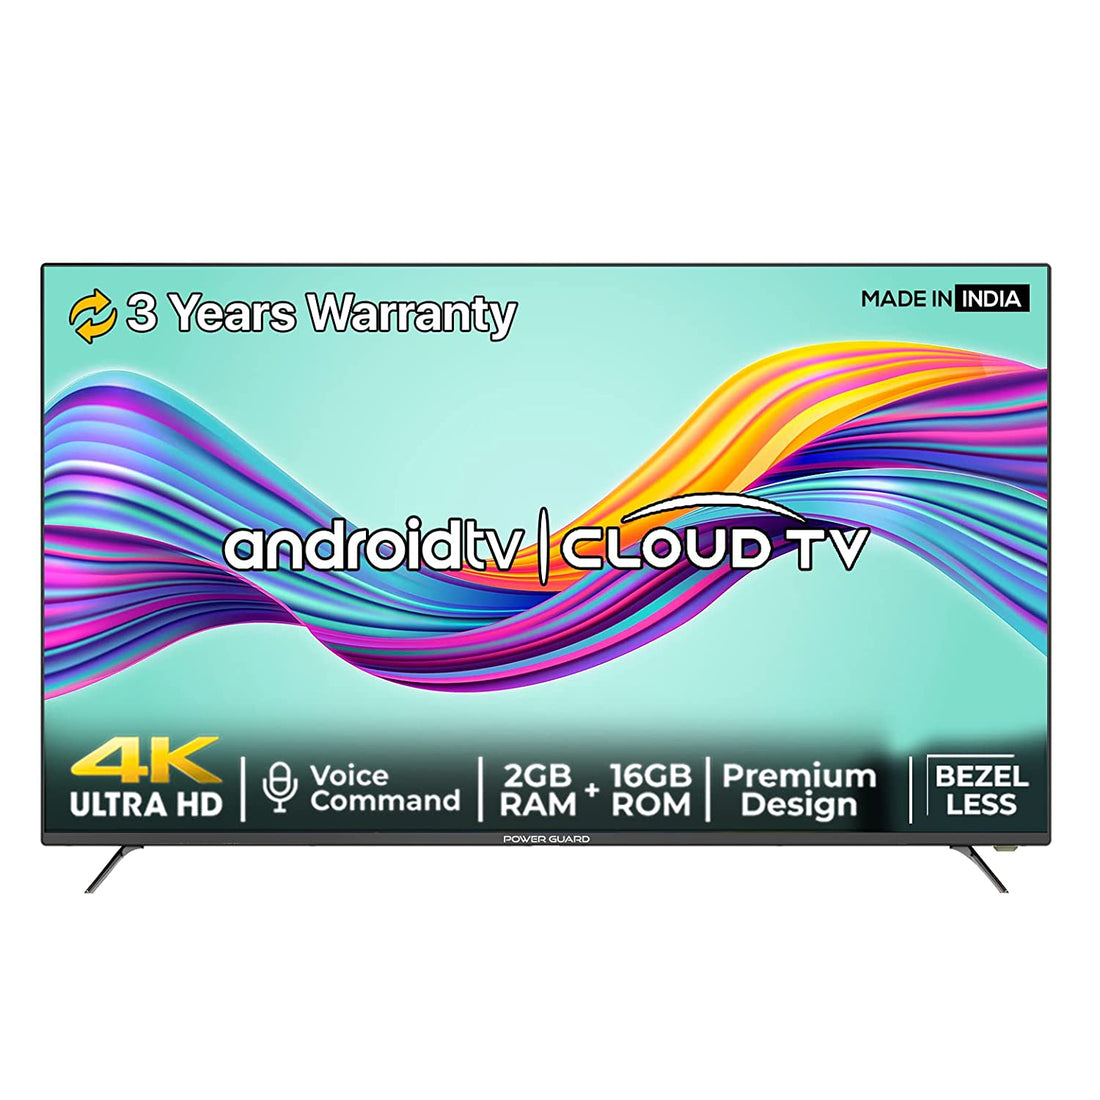 Best Deals on 65 Inch TV Low Price in India - Limited Time Offer